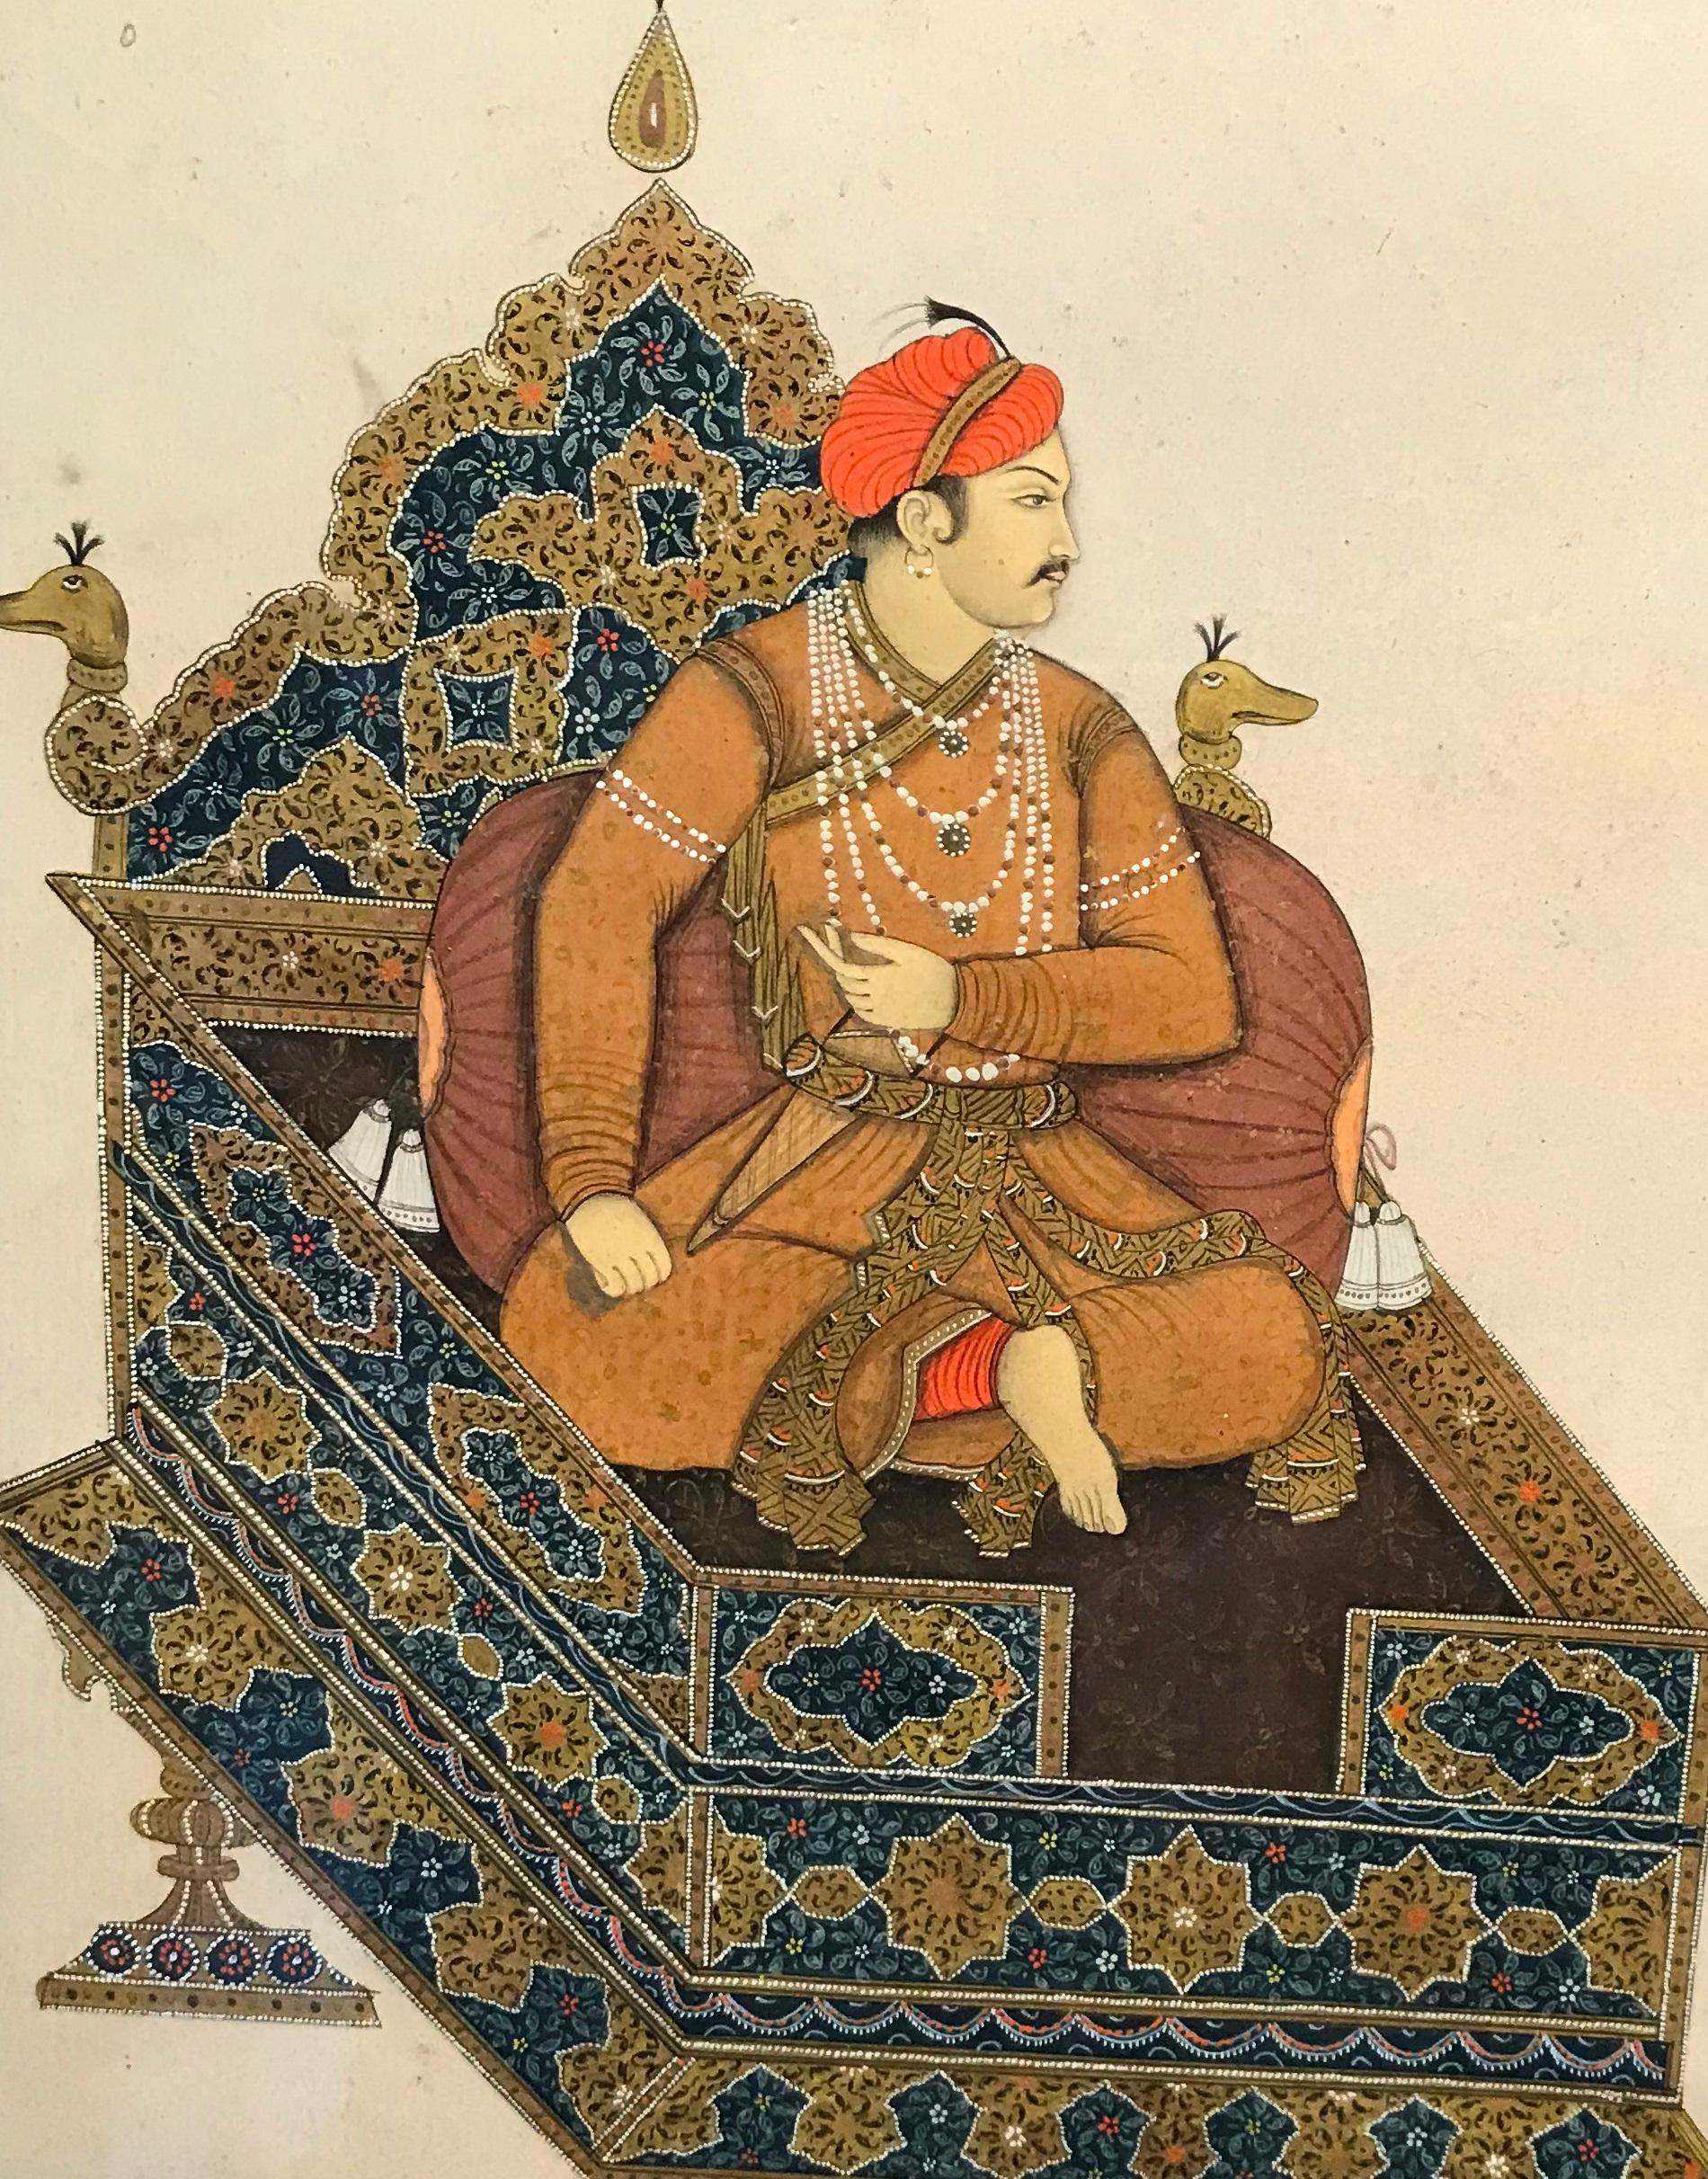 Antique Indo Persian Mughal Miniature Painting Portrait of Prince Salim Jahangir For Sale 2